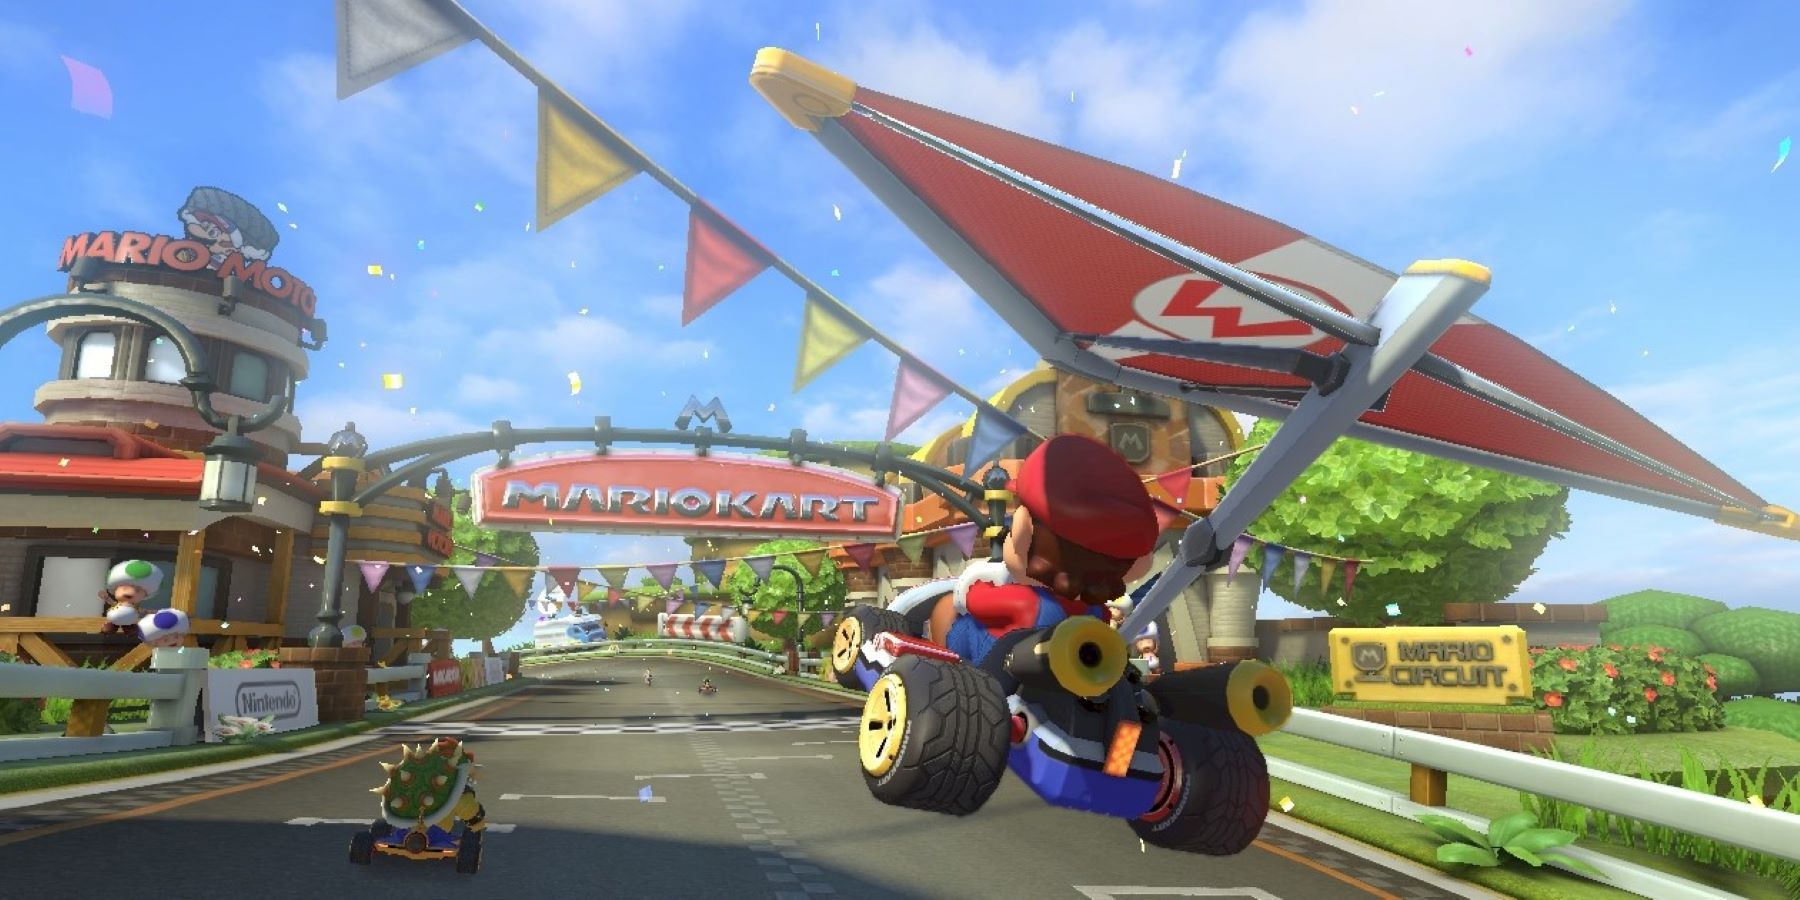 Mario gliding toward the finish line of a Mario Kart course with Bowser and a couple Toads in view